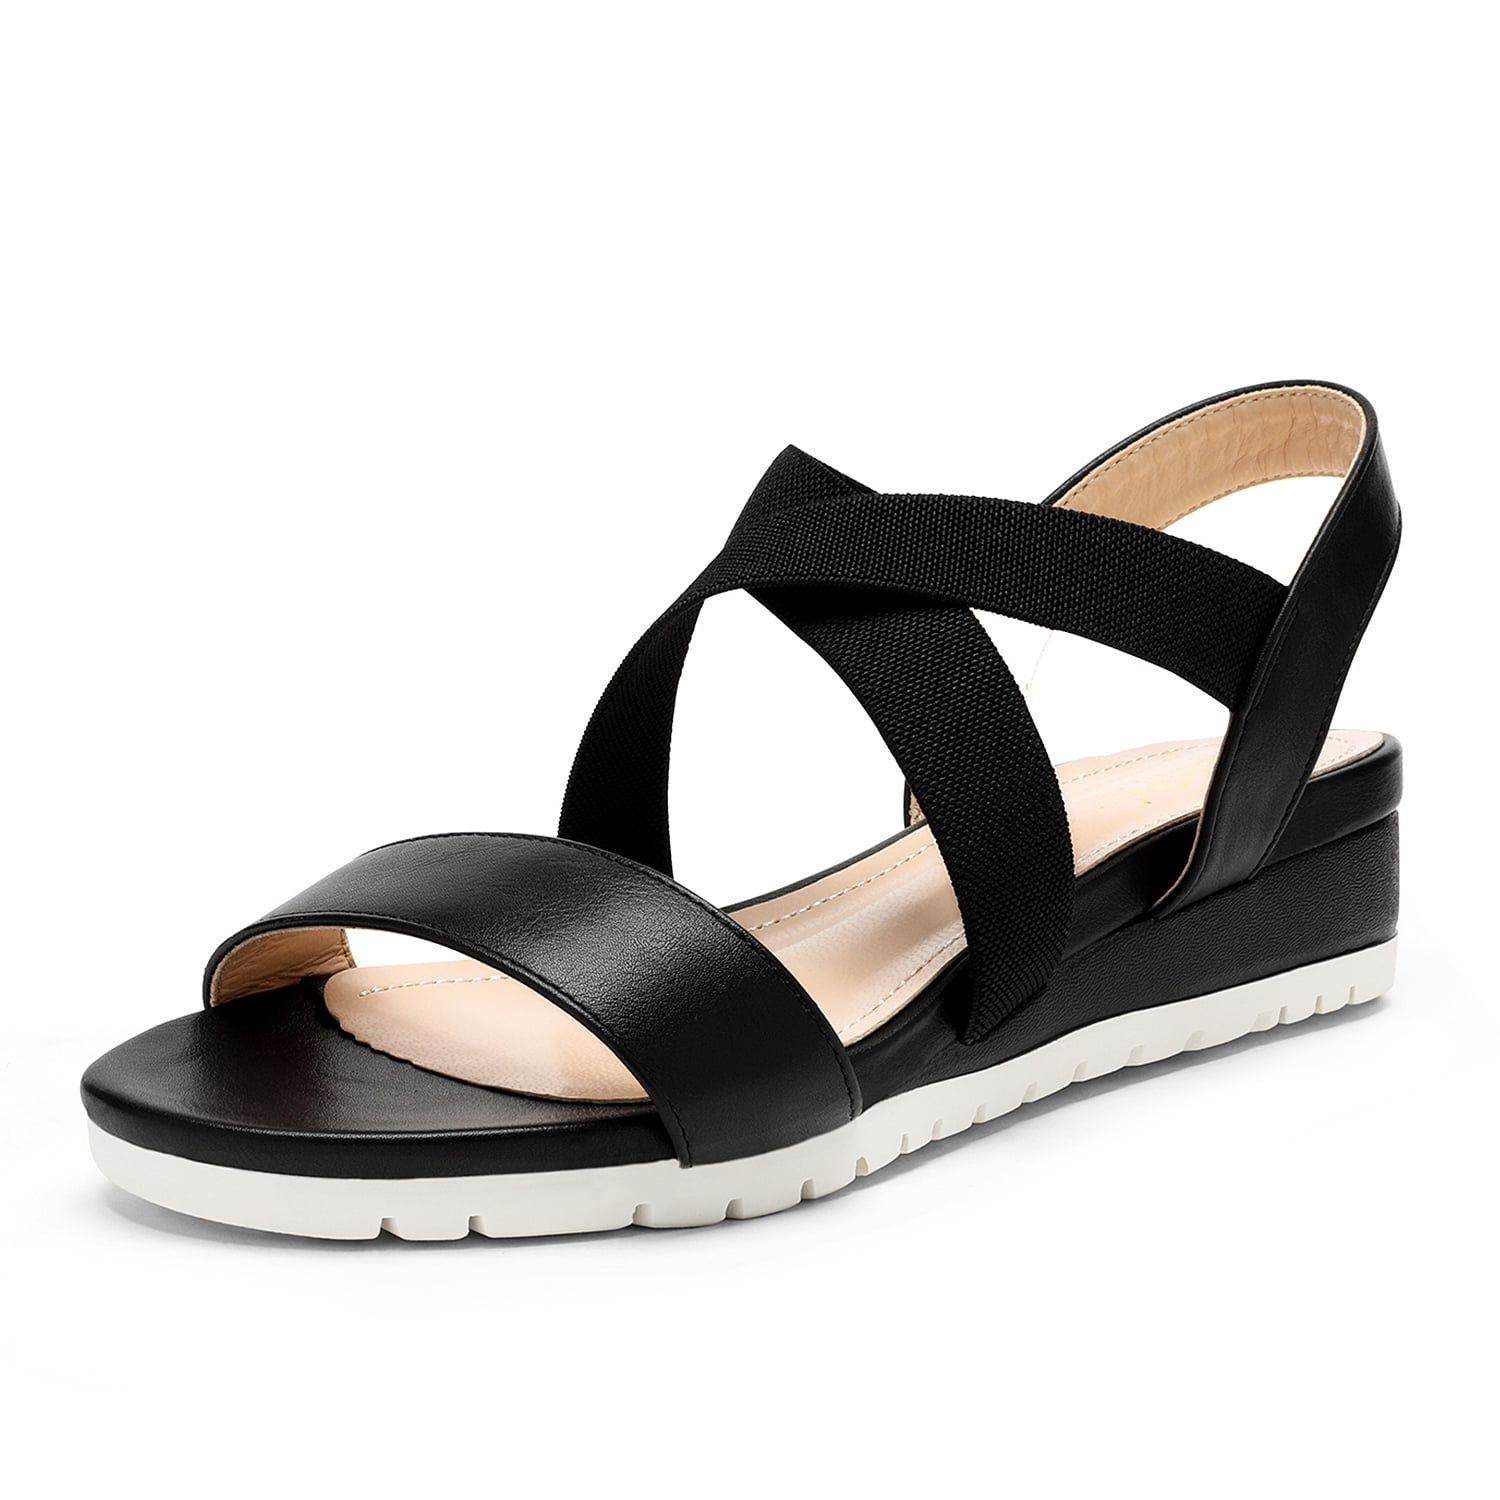 DREAM PAIRS Wedge Sandals for Open Ankle Platform Cute Slingback Beach Wedge Sandals KARELY-1 BLACK size 8 - Walmart.com